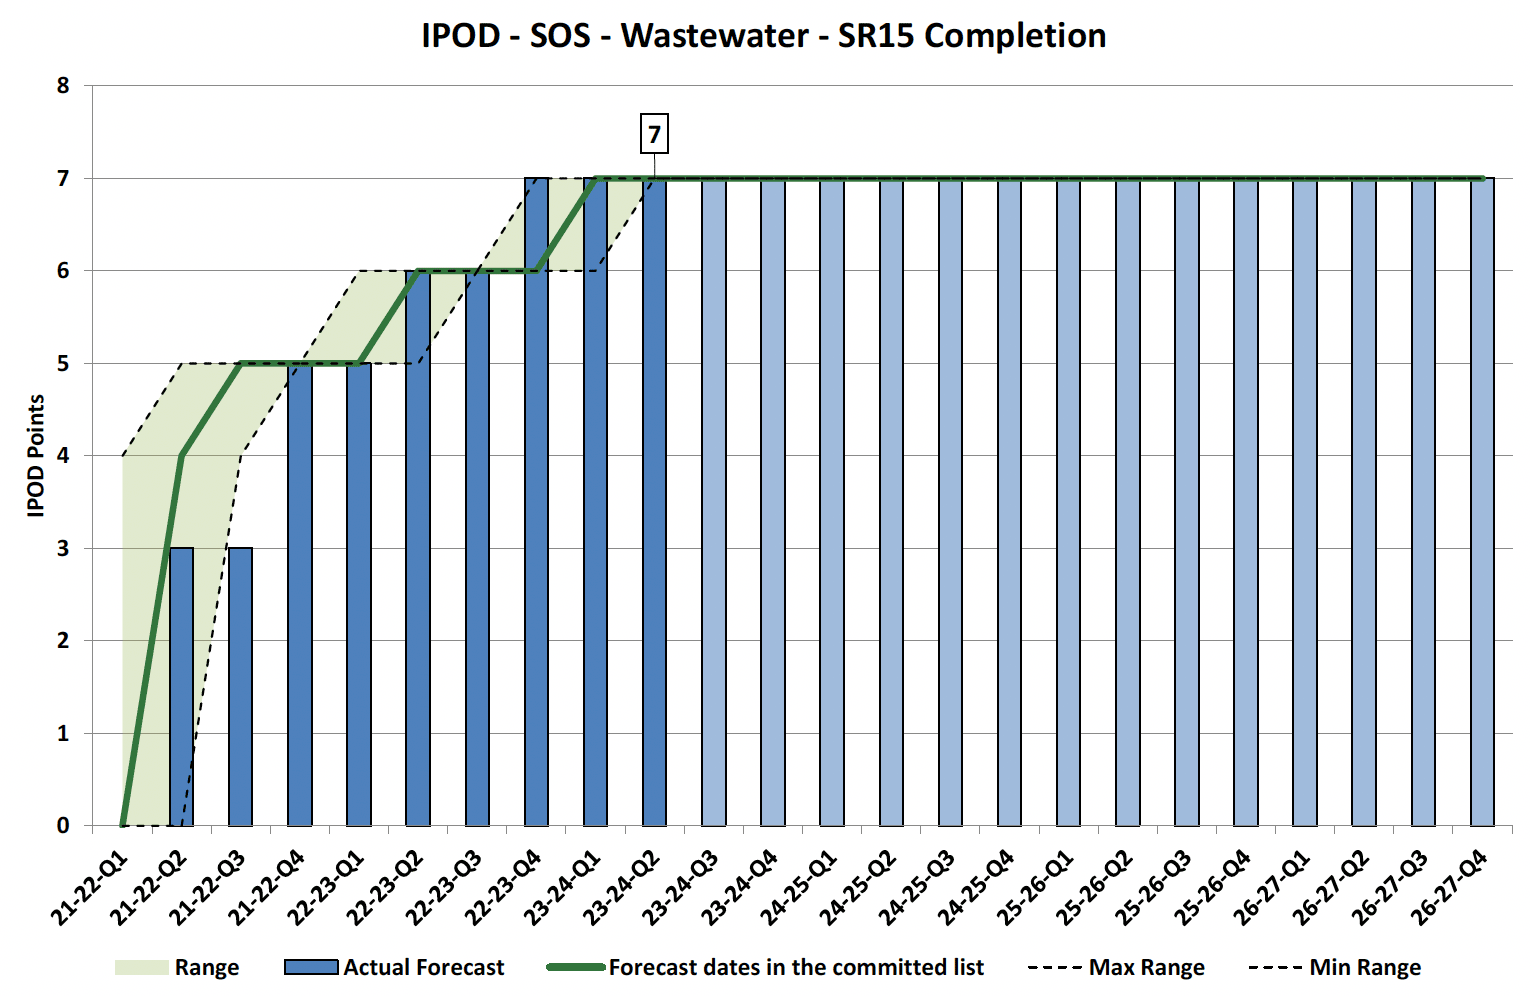 Chart showing IPOD points achieved or forecast for Start on Site milestone against target range for SR15 Completion Projects in Wastewater Portfolio